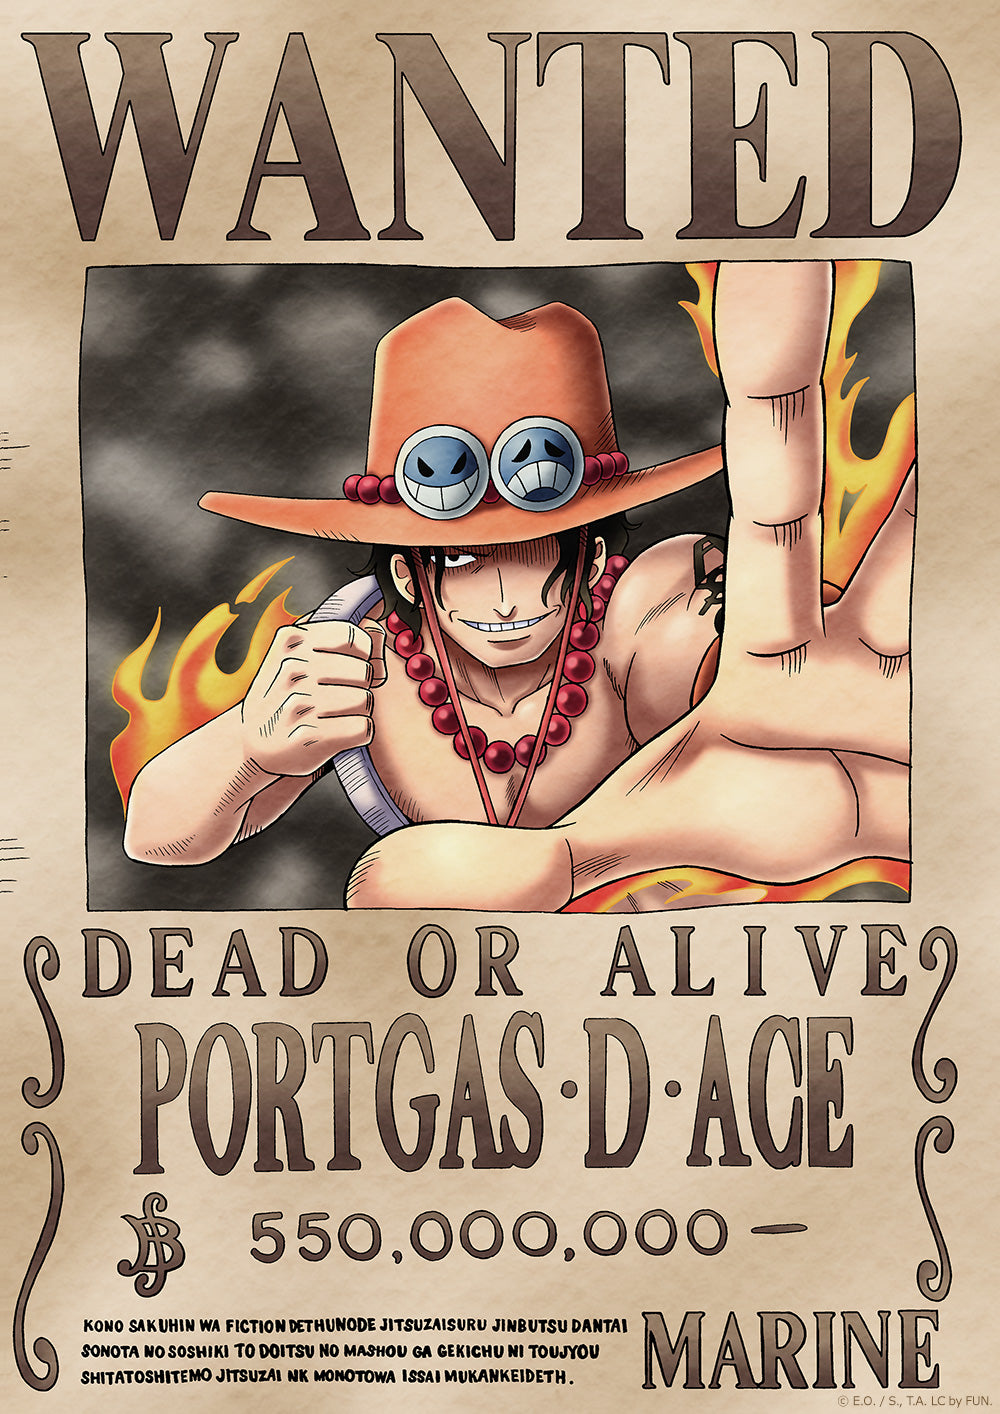 ONE PIECE WANTED: Dead or Alive Poster: Portgas D. Ace Official Lice